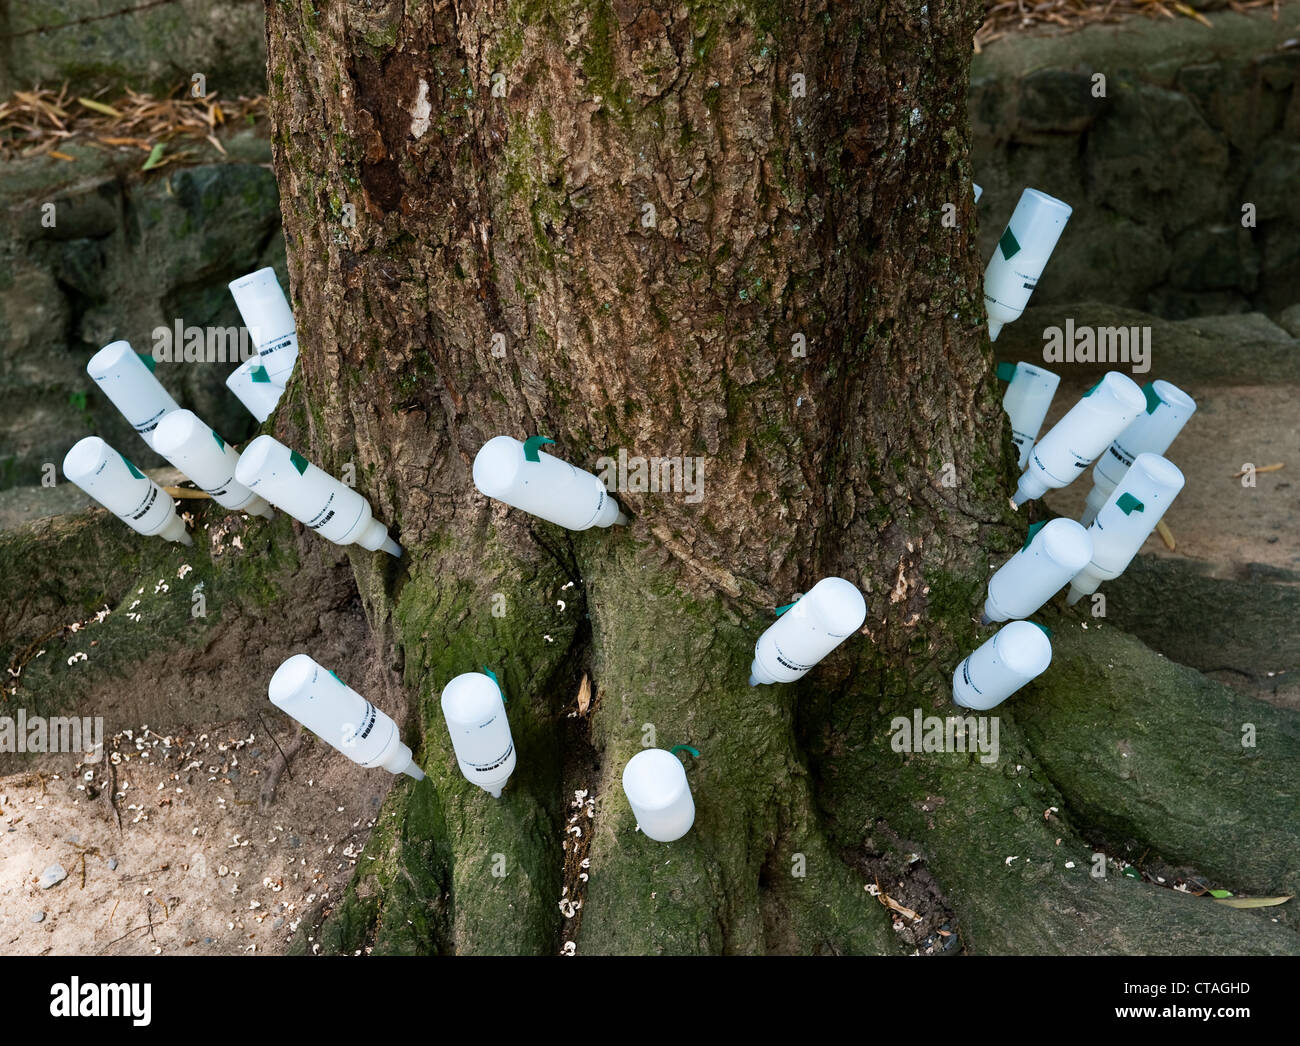 In a public park in Kyoto, Japan, mineral supplements are injected into an ailing tree to nourish it Stock Photo